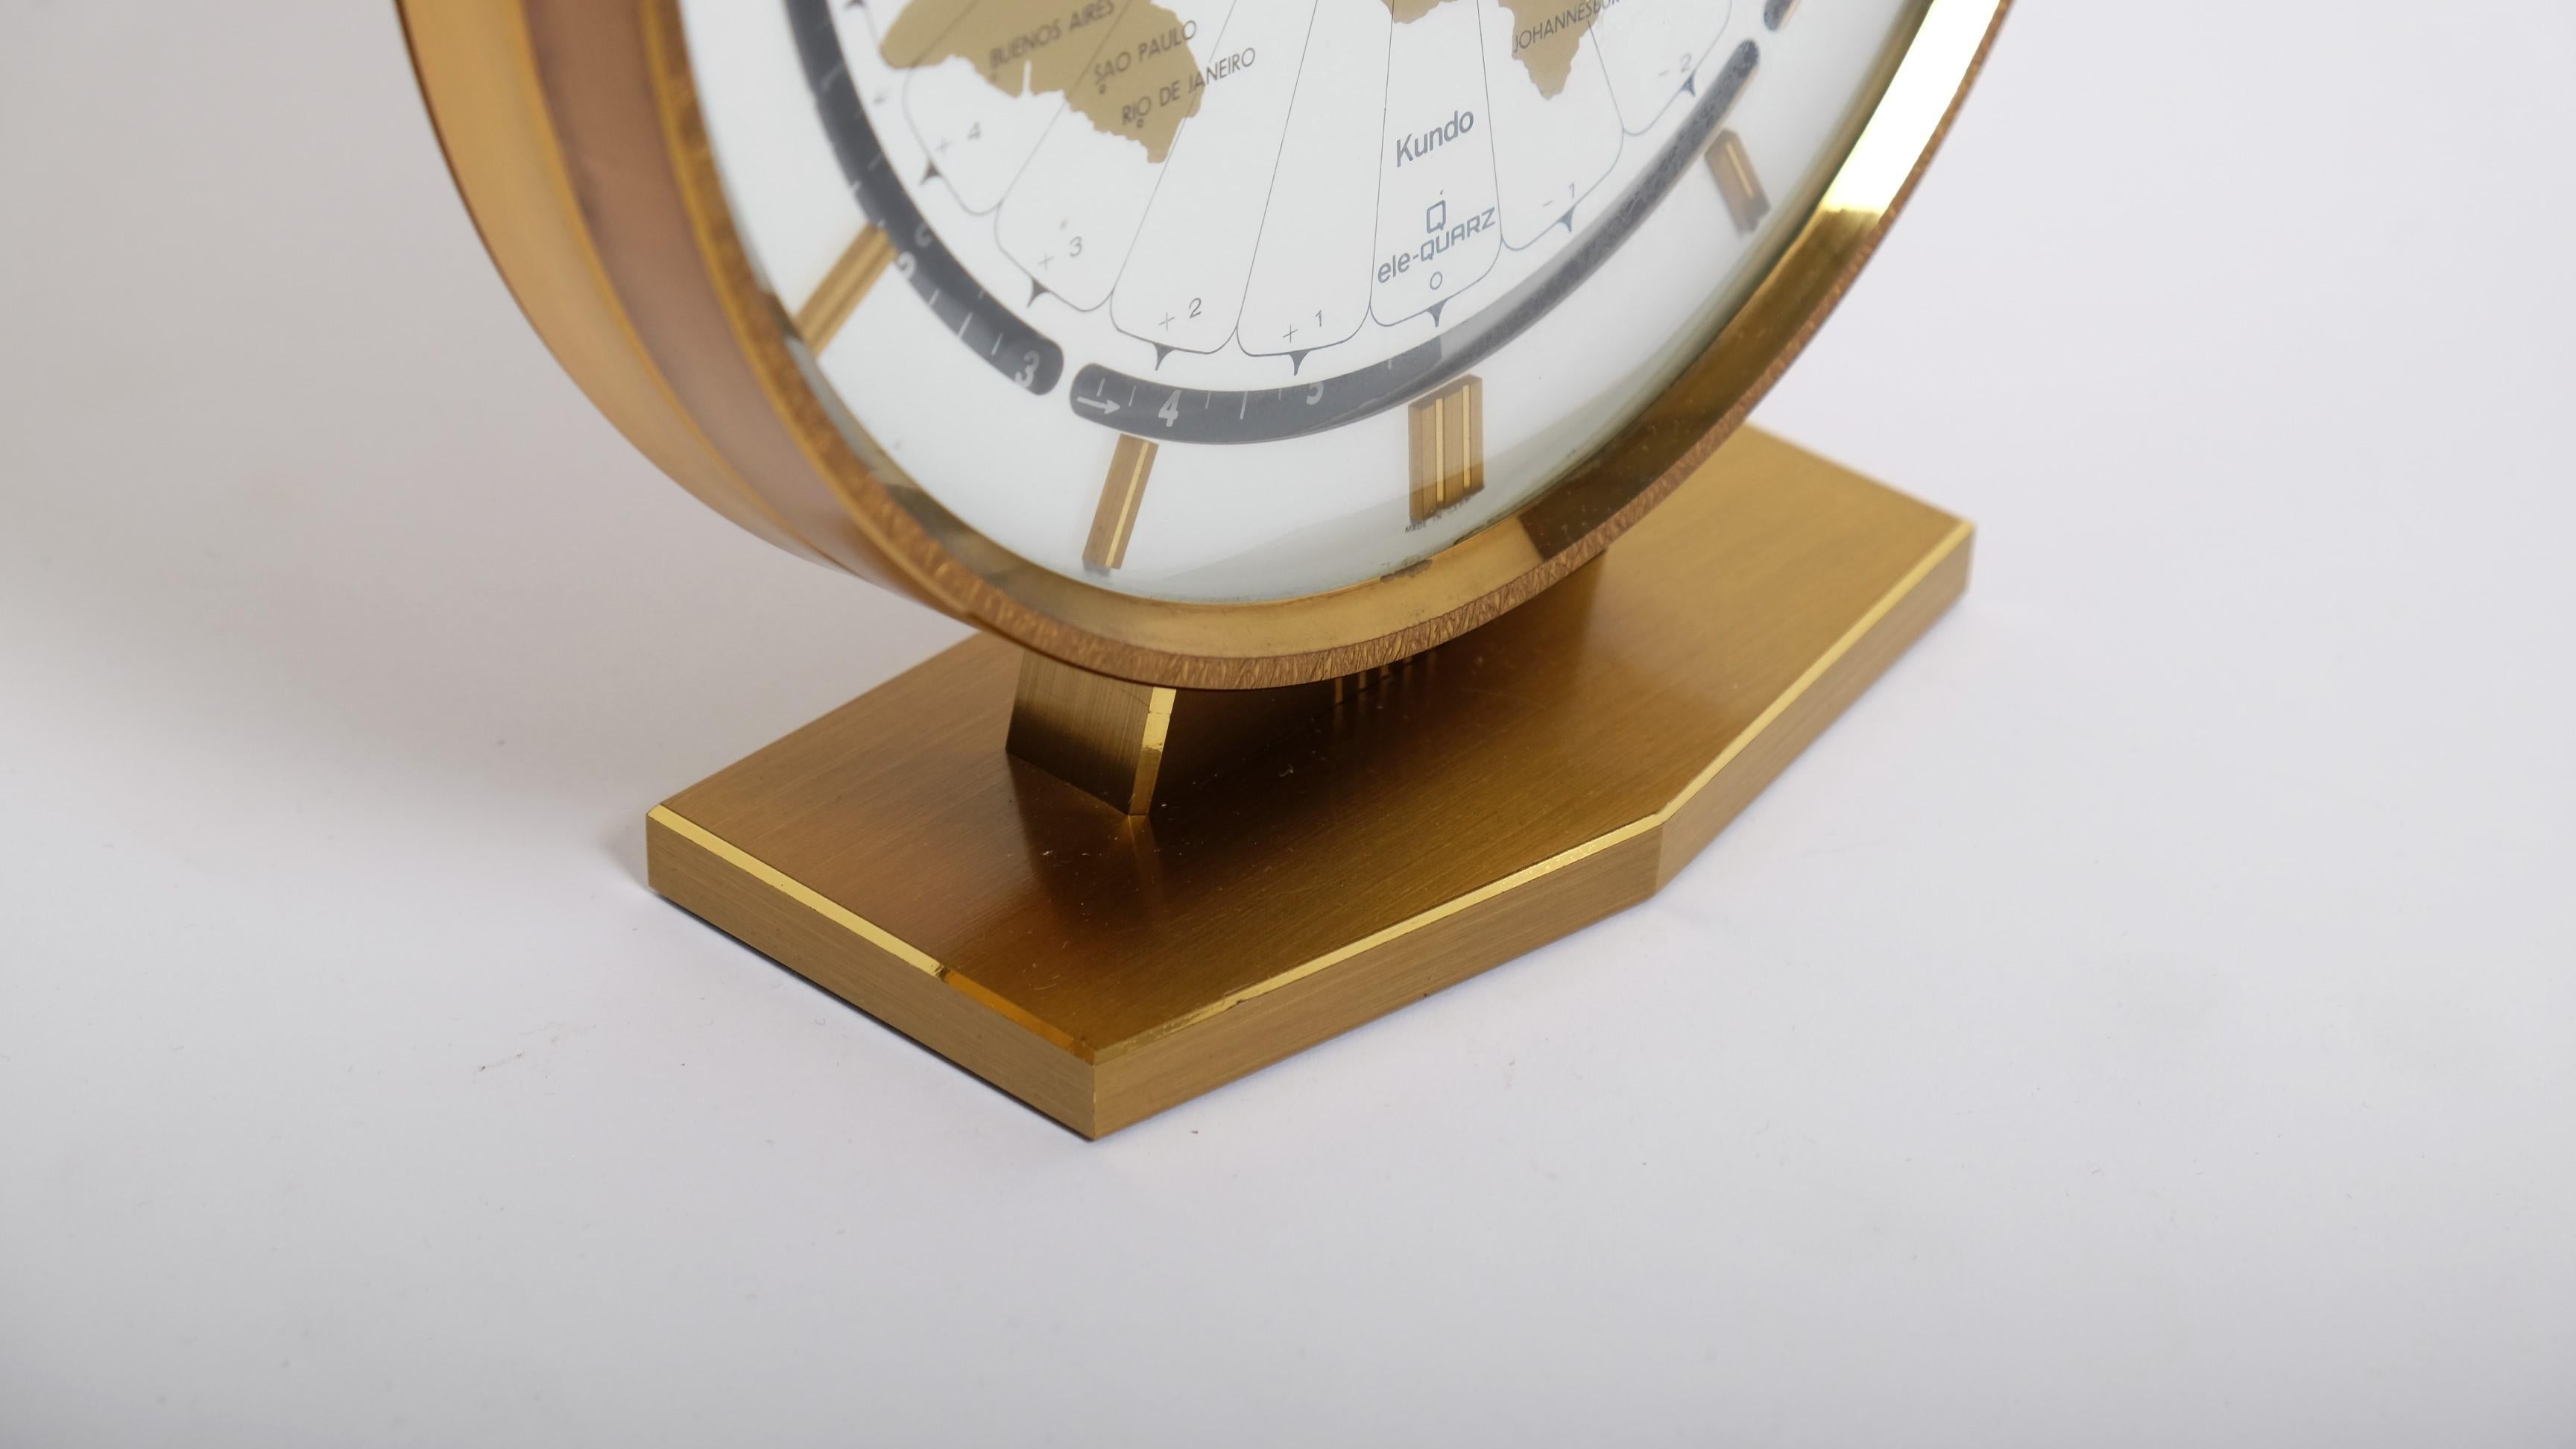 Large Brass Table World Time Zone Clock by Kundo / Kieninger & Obergfell, 1970s For Sale 9